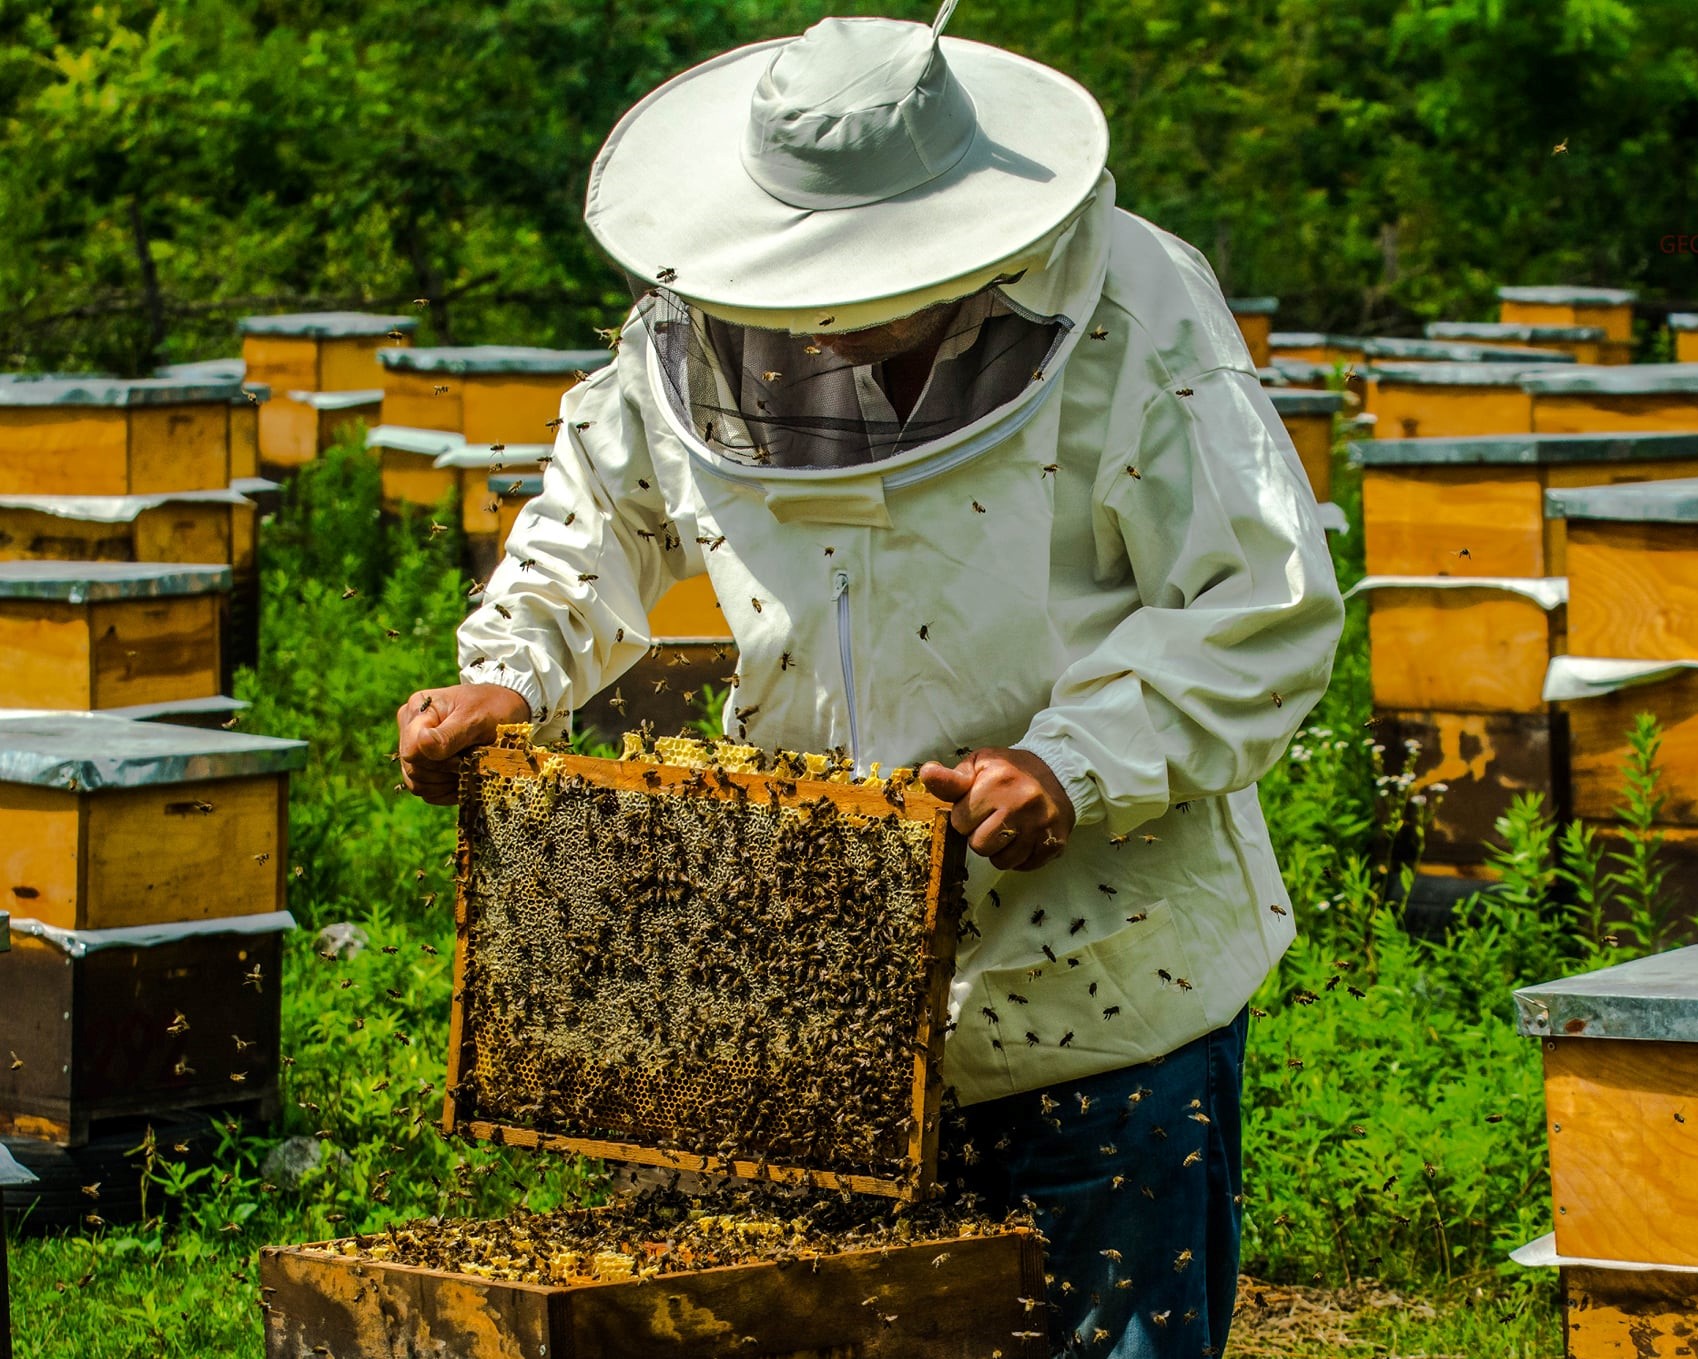 The second stage of beekeeping is beginning